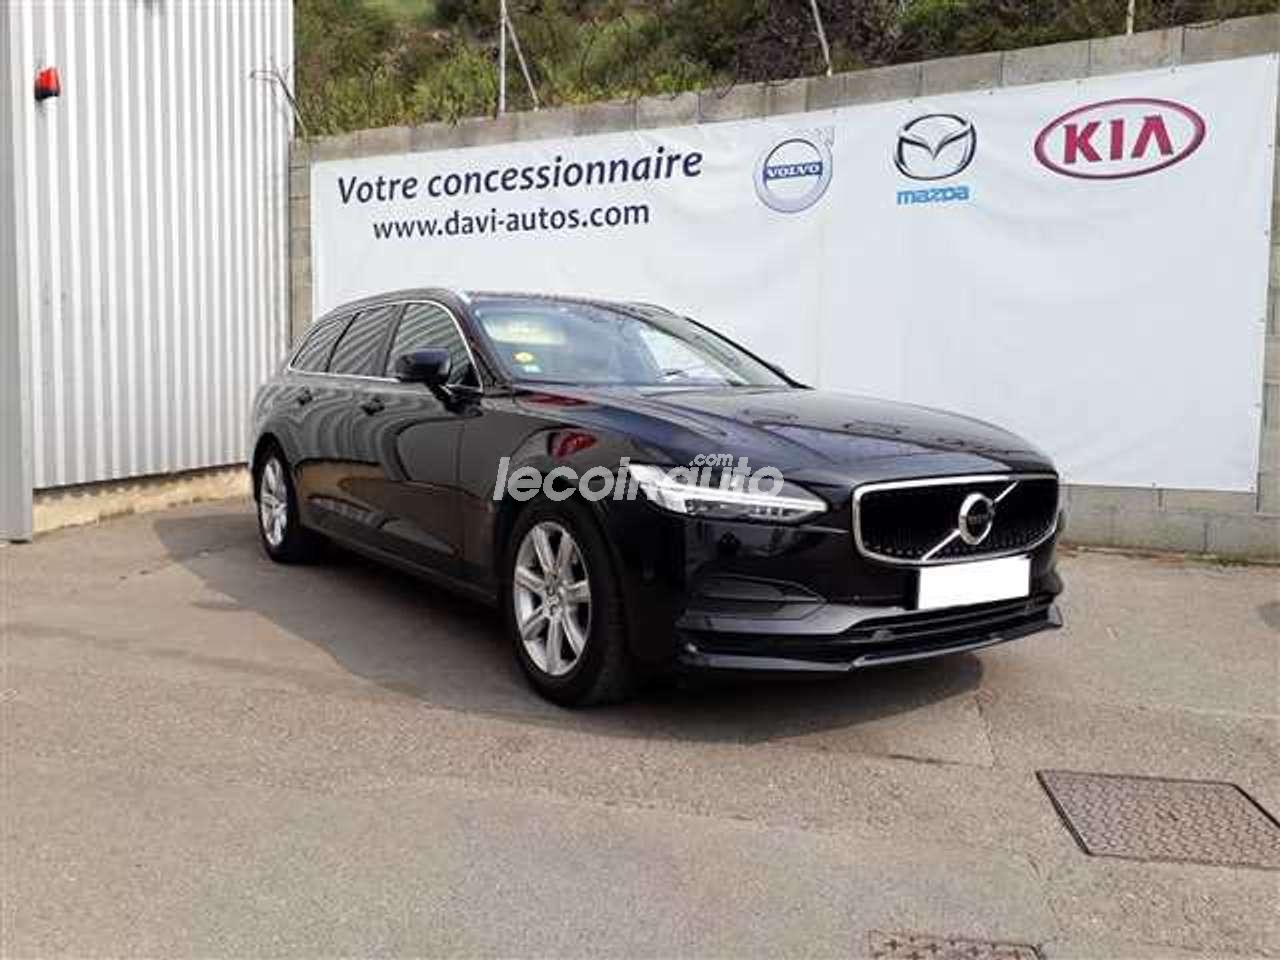 Volvo V90
D4 190 ch Geartronic 8 Momentum Business